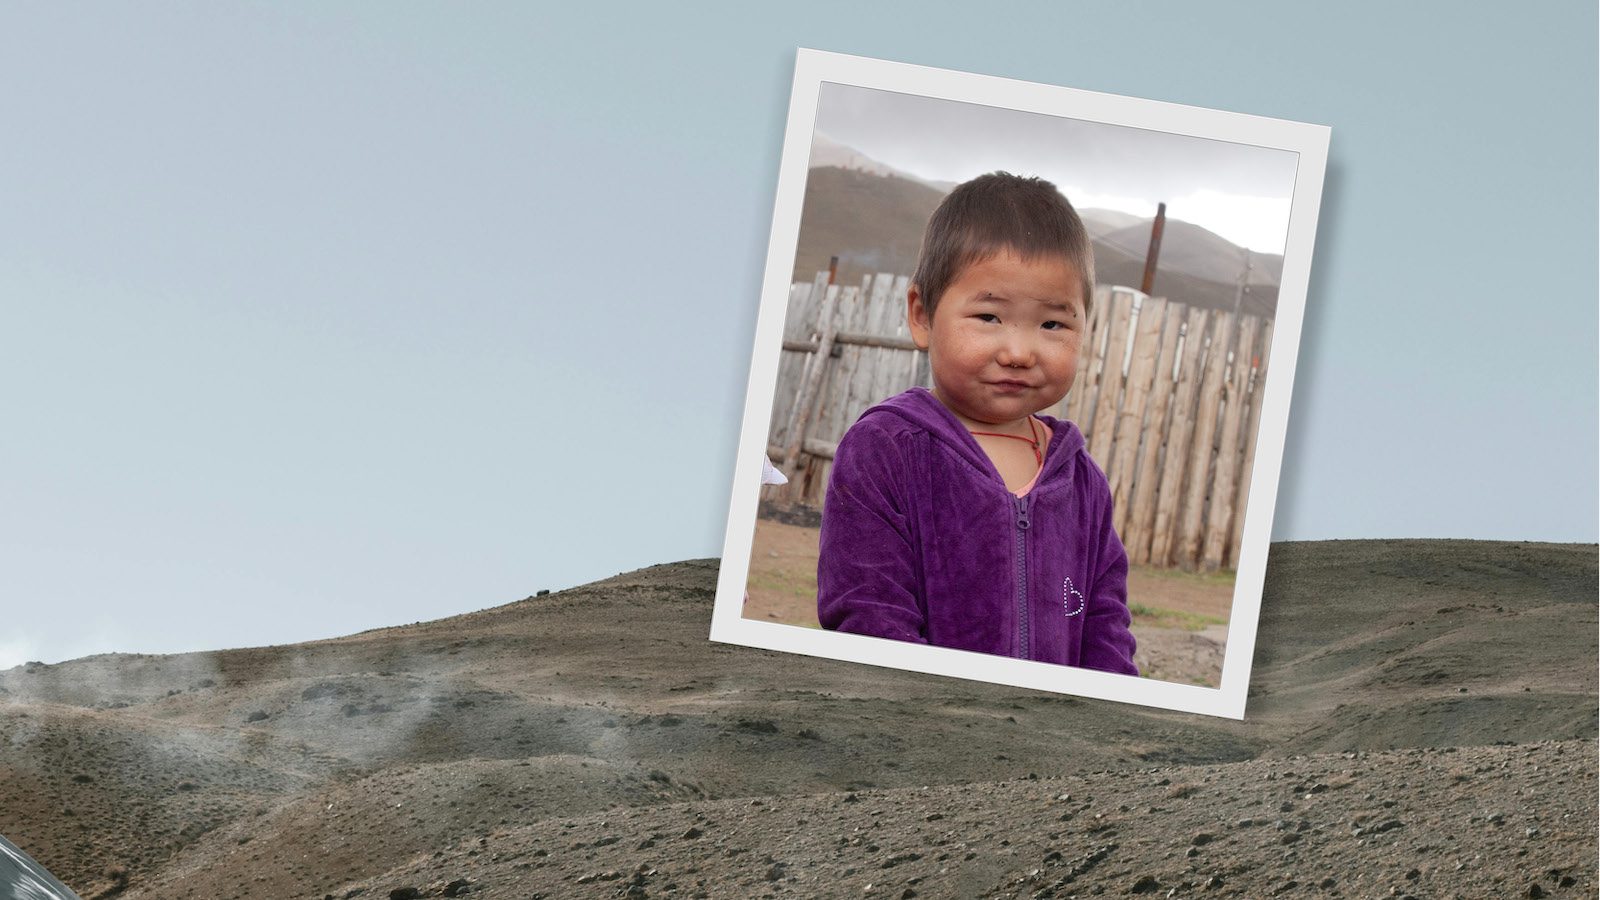 Little girl wearing a purple coat while standing in the cold in Mongolia.